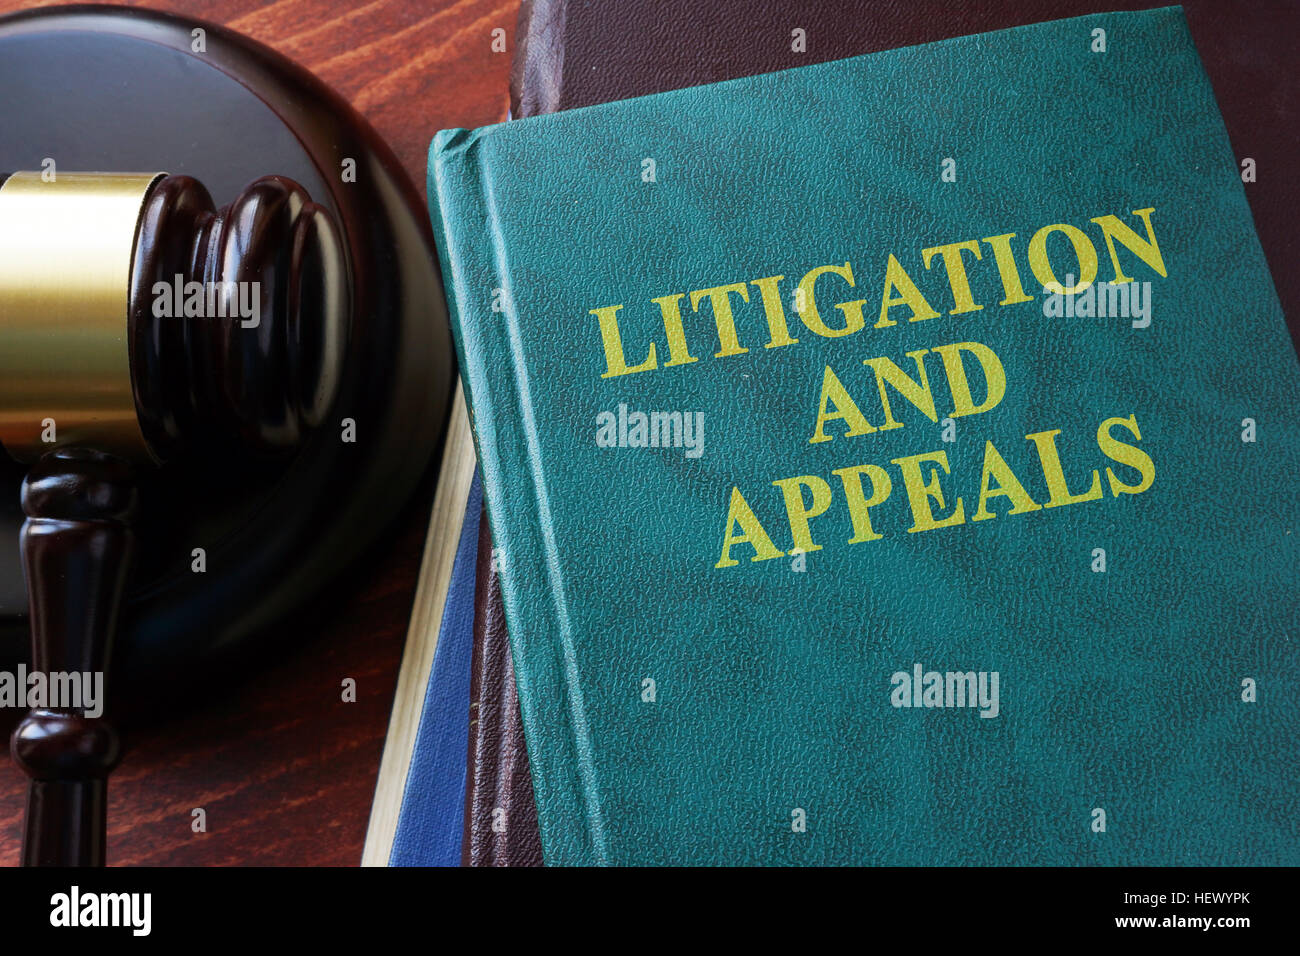 Litigation and appeals title on a book and gavel. Stock Photo